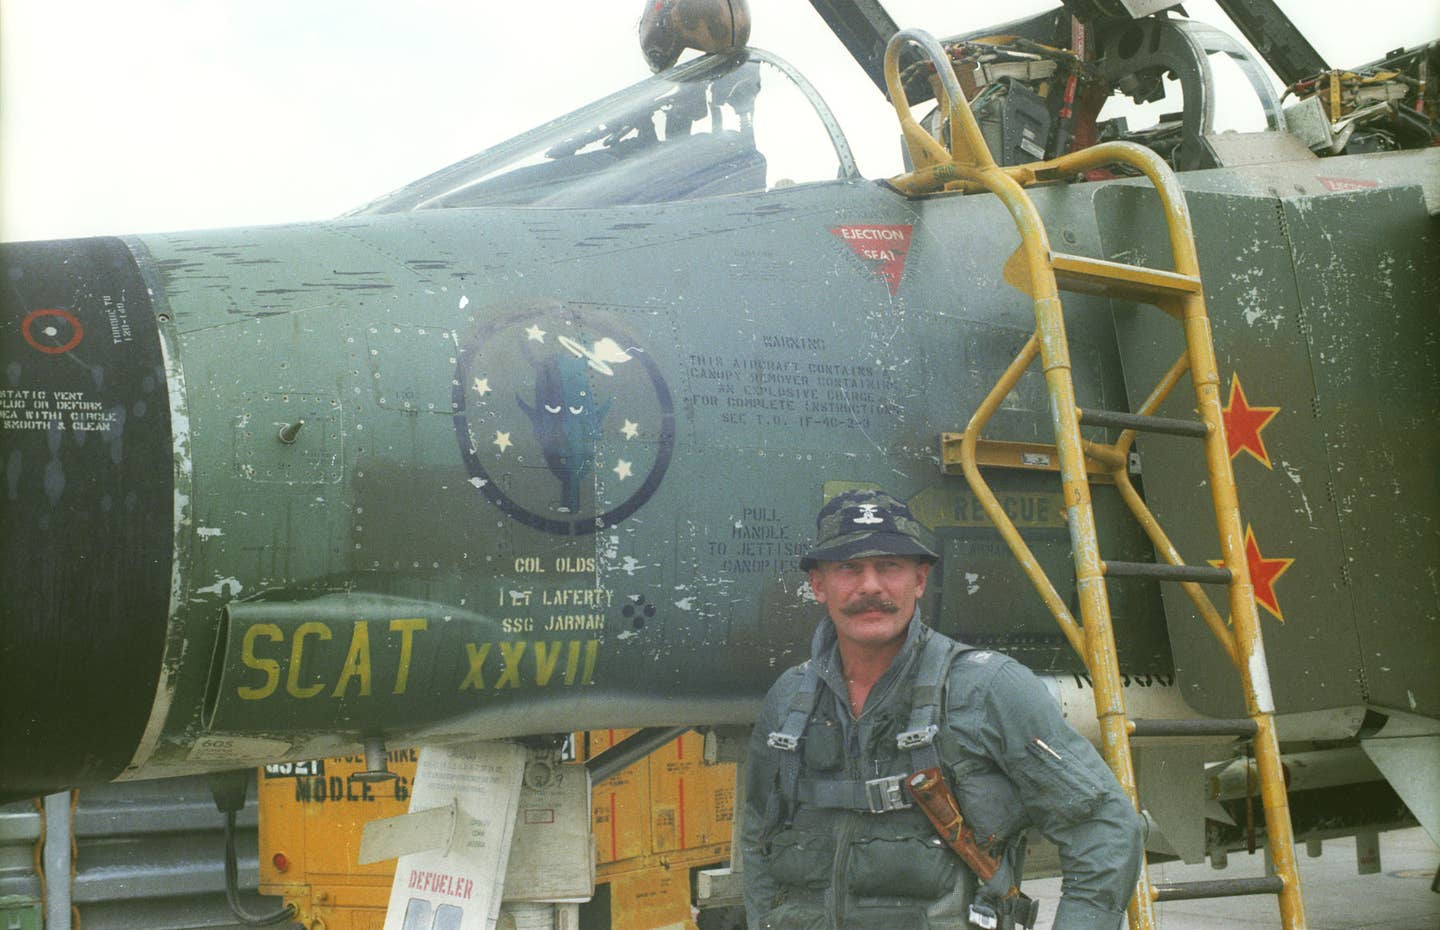 Col. Robin Olds at Ubon Royal Thai Air Force Base, Thailand, with his F-4C, named <em>SCAT XXVII</em>, named after his West Point roommate Scat Davis, who could not become a military pilot due to poor eyesight. This aircraft is now preserved at the National Museum of the U.S. Air Force. <em>U.S. Air Force photo</em><br><a href="https://www.nationalmuseum.af.mil/Visit/Museum-Exhibits/Fact-Sheets/Display/Article/196007/brig-gen-robin-olds-combat-leader-and-fighter-ace/undefined"></a>